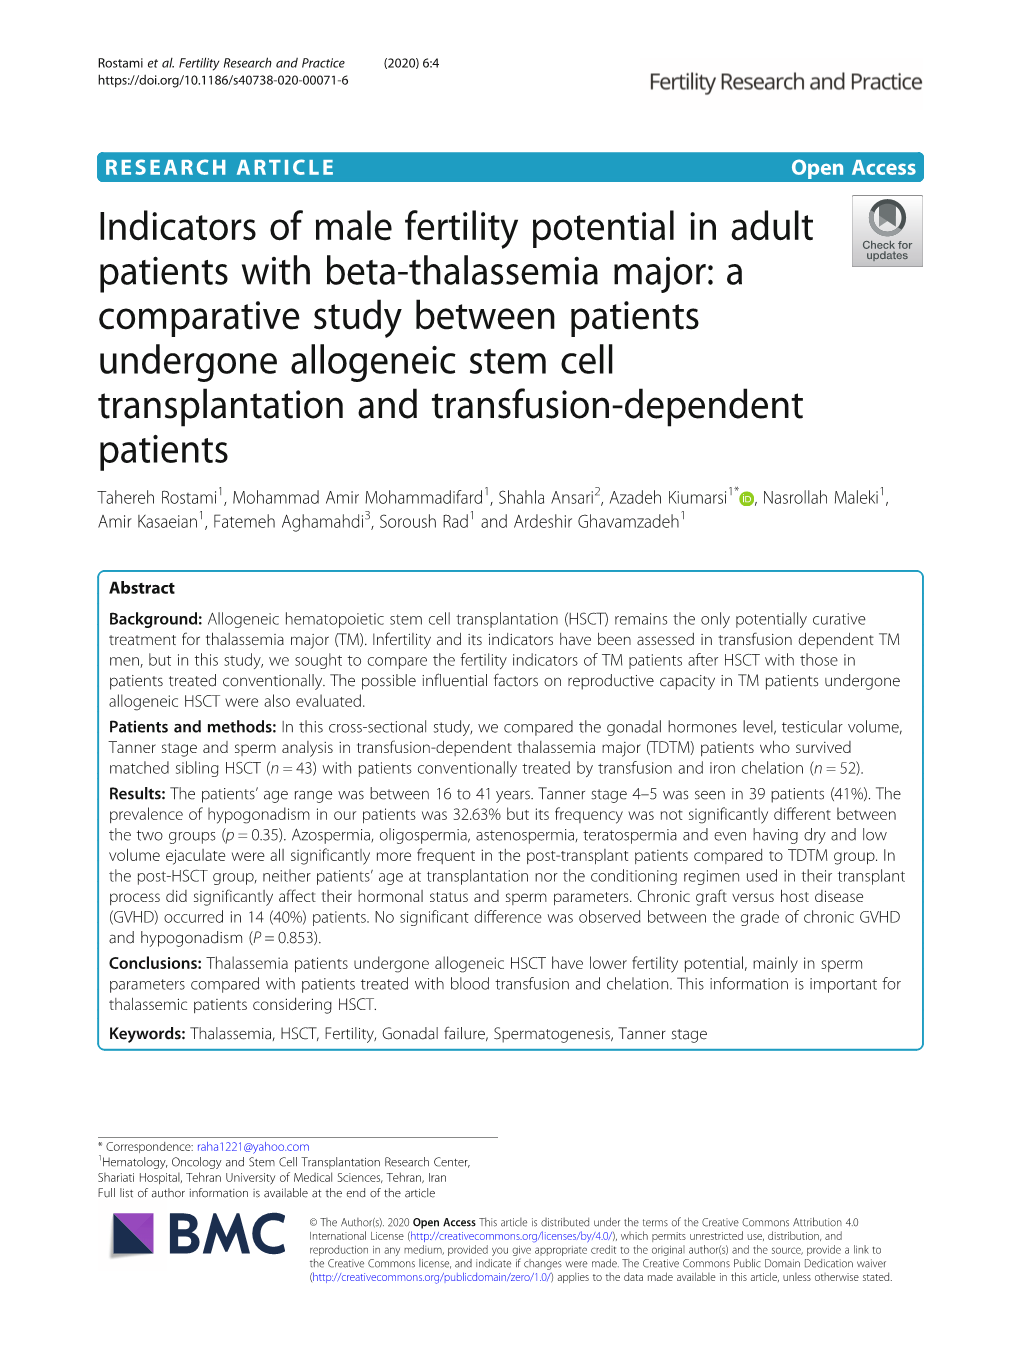 Indicators of Male Fertility Potential in Adult Patients with Beta-Thalassemia